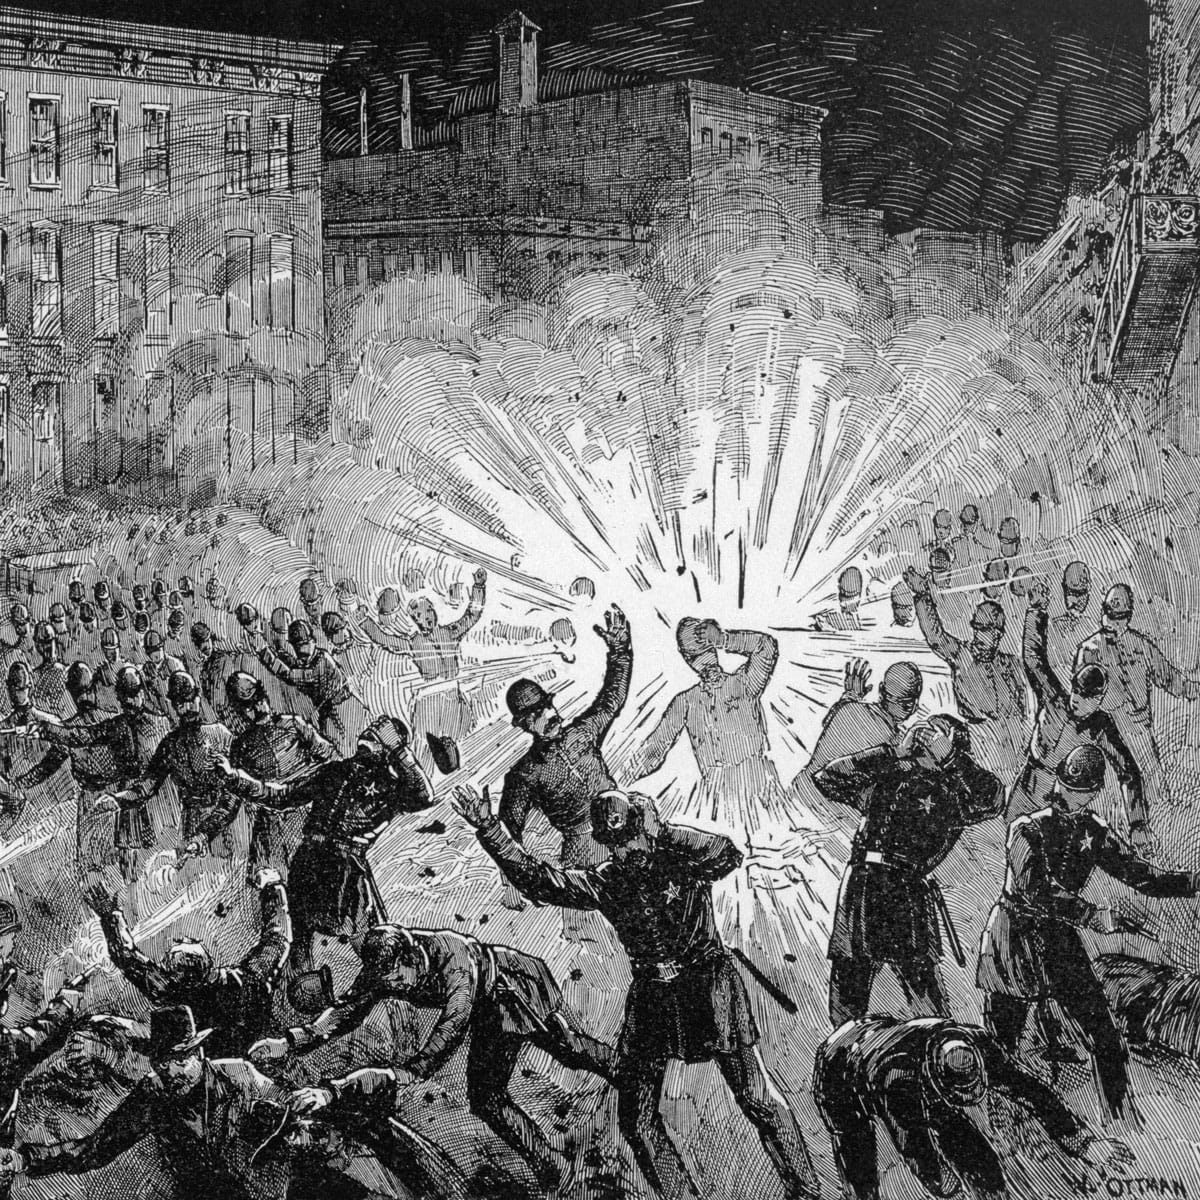 Illustration of what appears to be an explosion and a crowd of people around falling outward